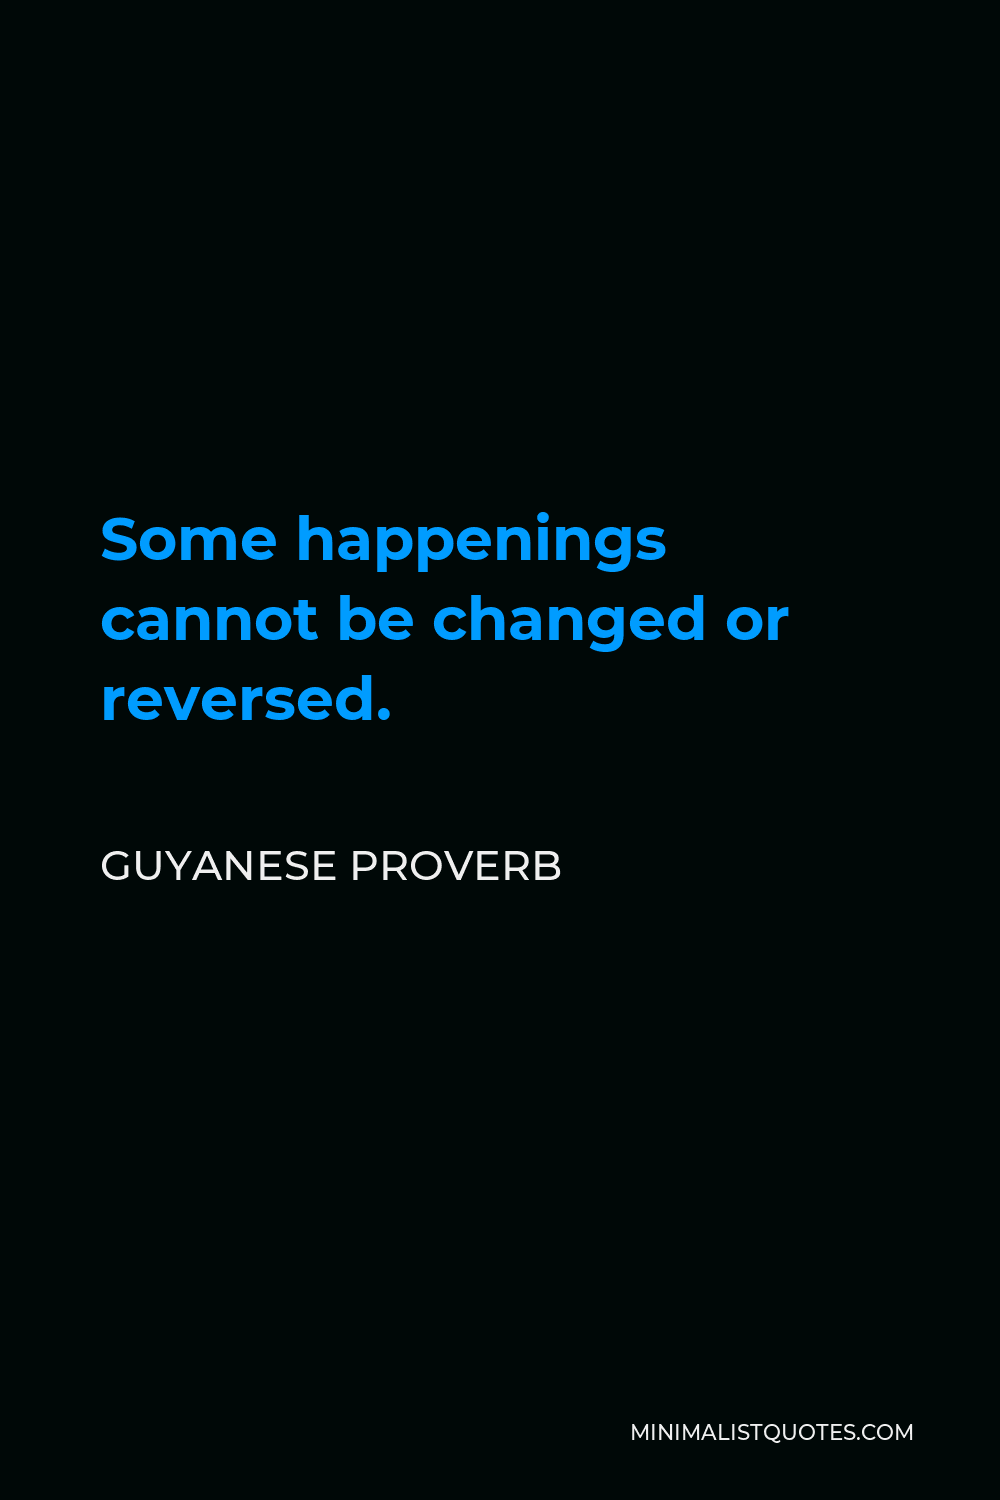 Guyanese Proverb Quote - Some happenings cannot be changed or reversed.